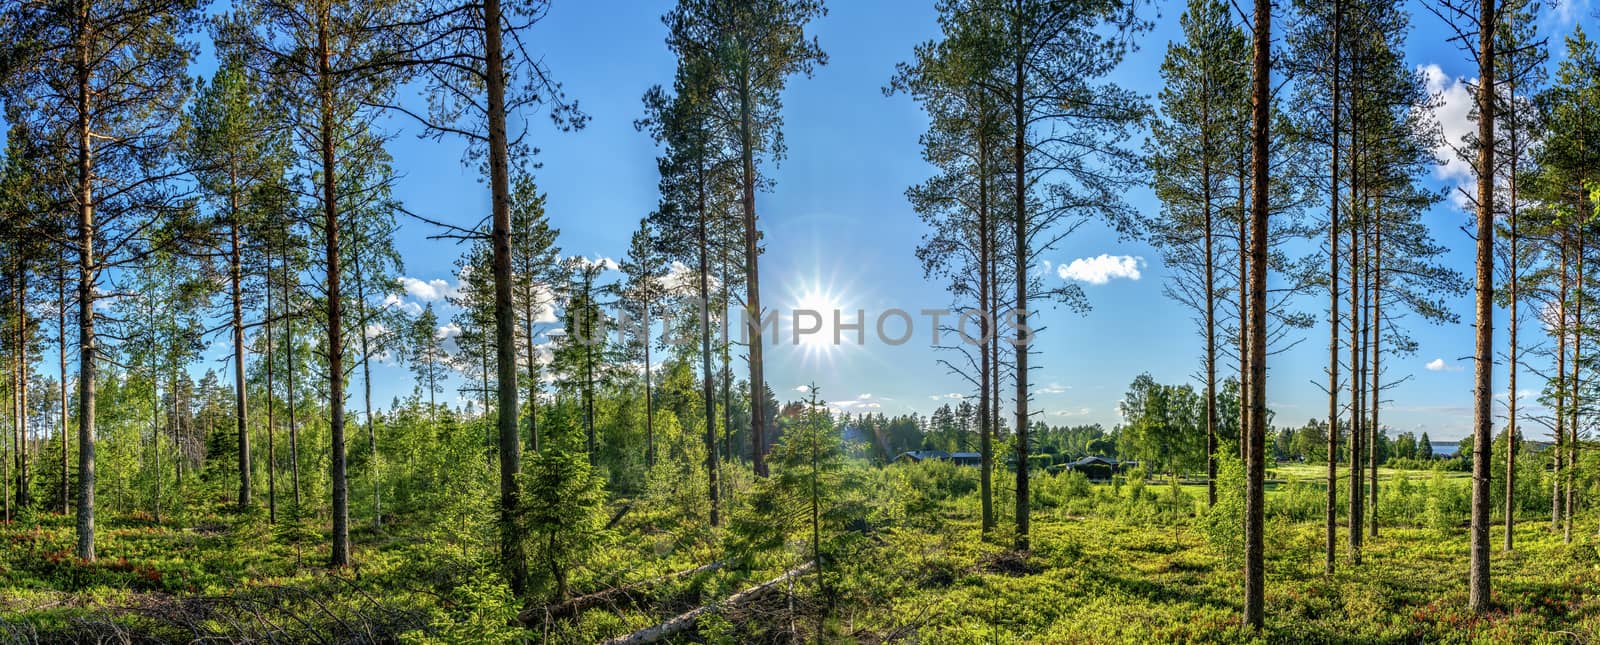 Beautiful view at small Scandinavian village from inside of Swedish forest through green forest trees under Sun rays. Scenic background picture of Scandinavian summer nature.